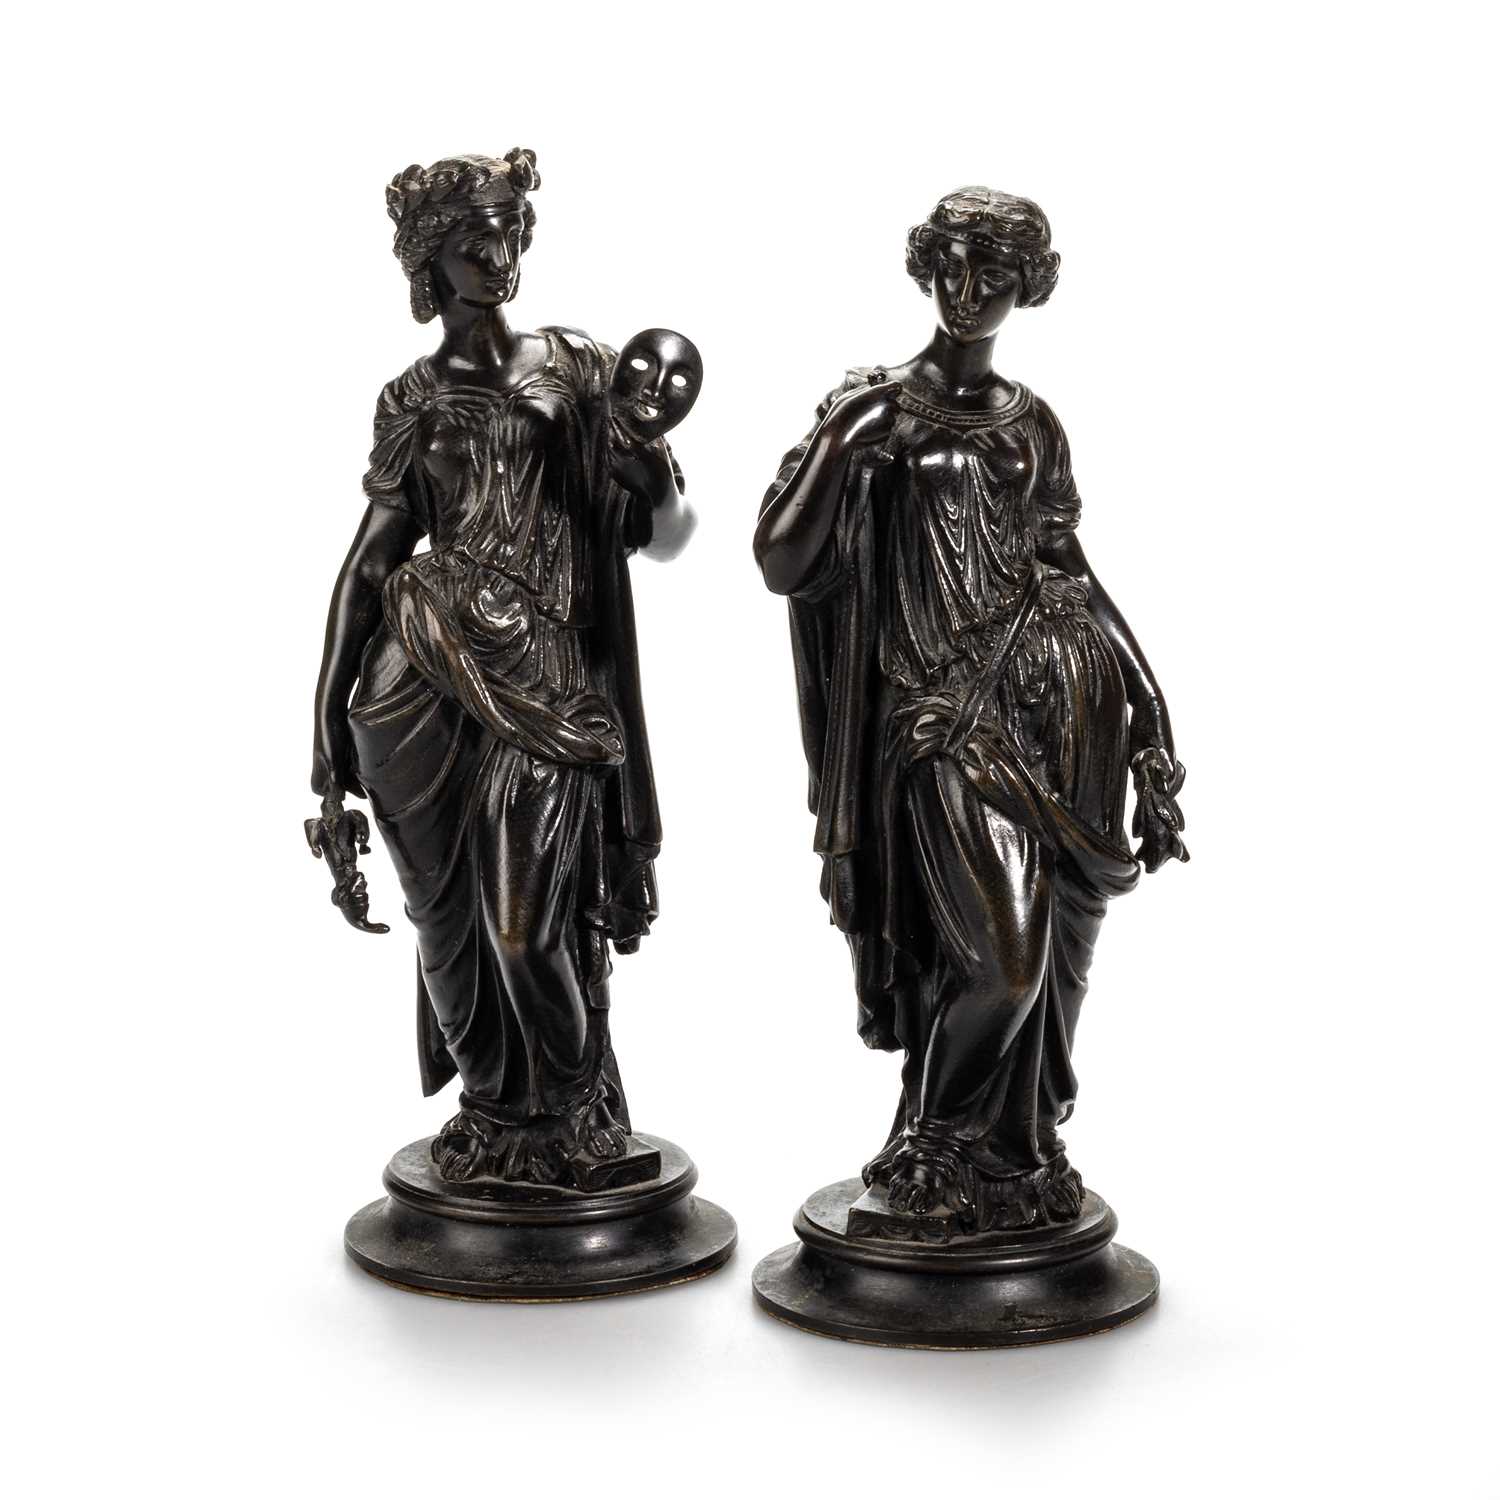 A PAIR OF FRENCH BRONZE ALLEGORICAL FIGURES, 19TH CENTURY